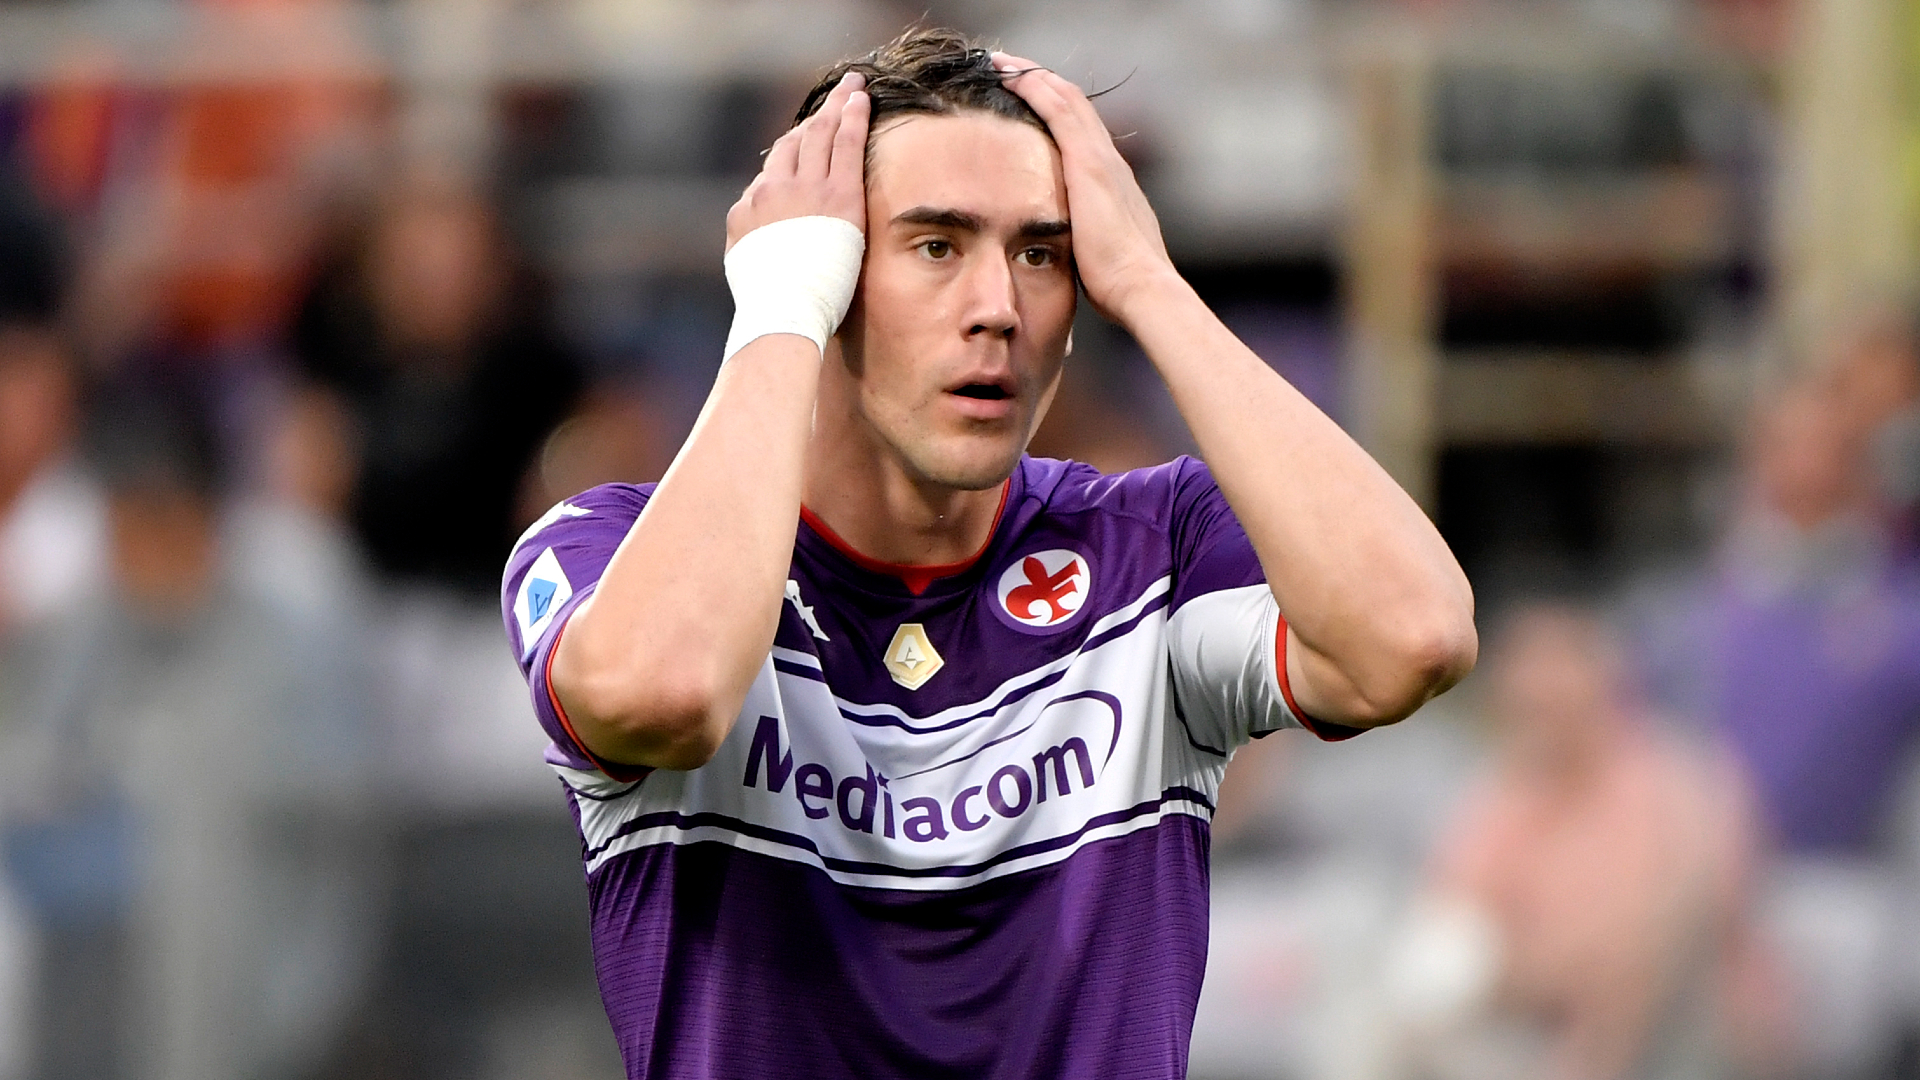 In-demand Vlahovic will not renew Fiorentina contract